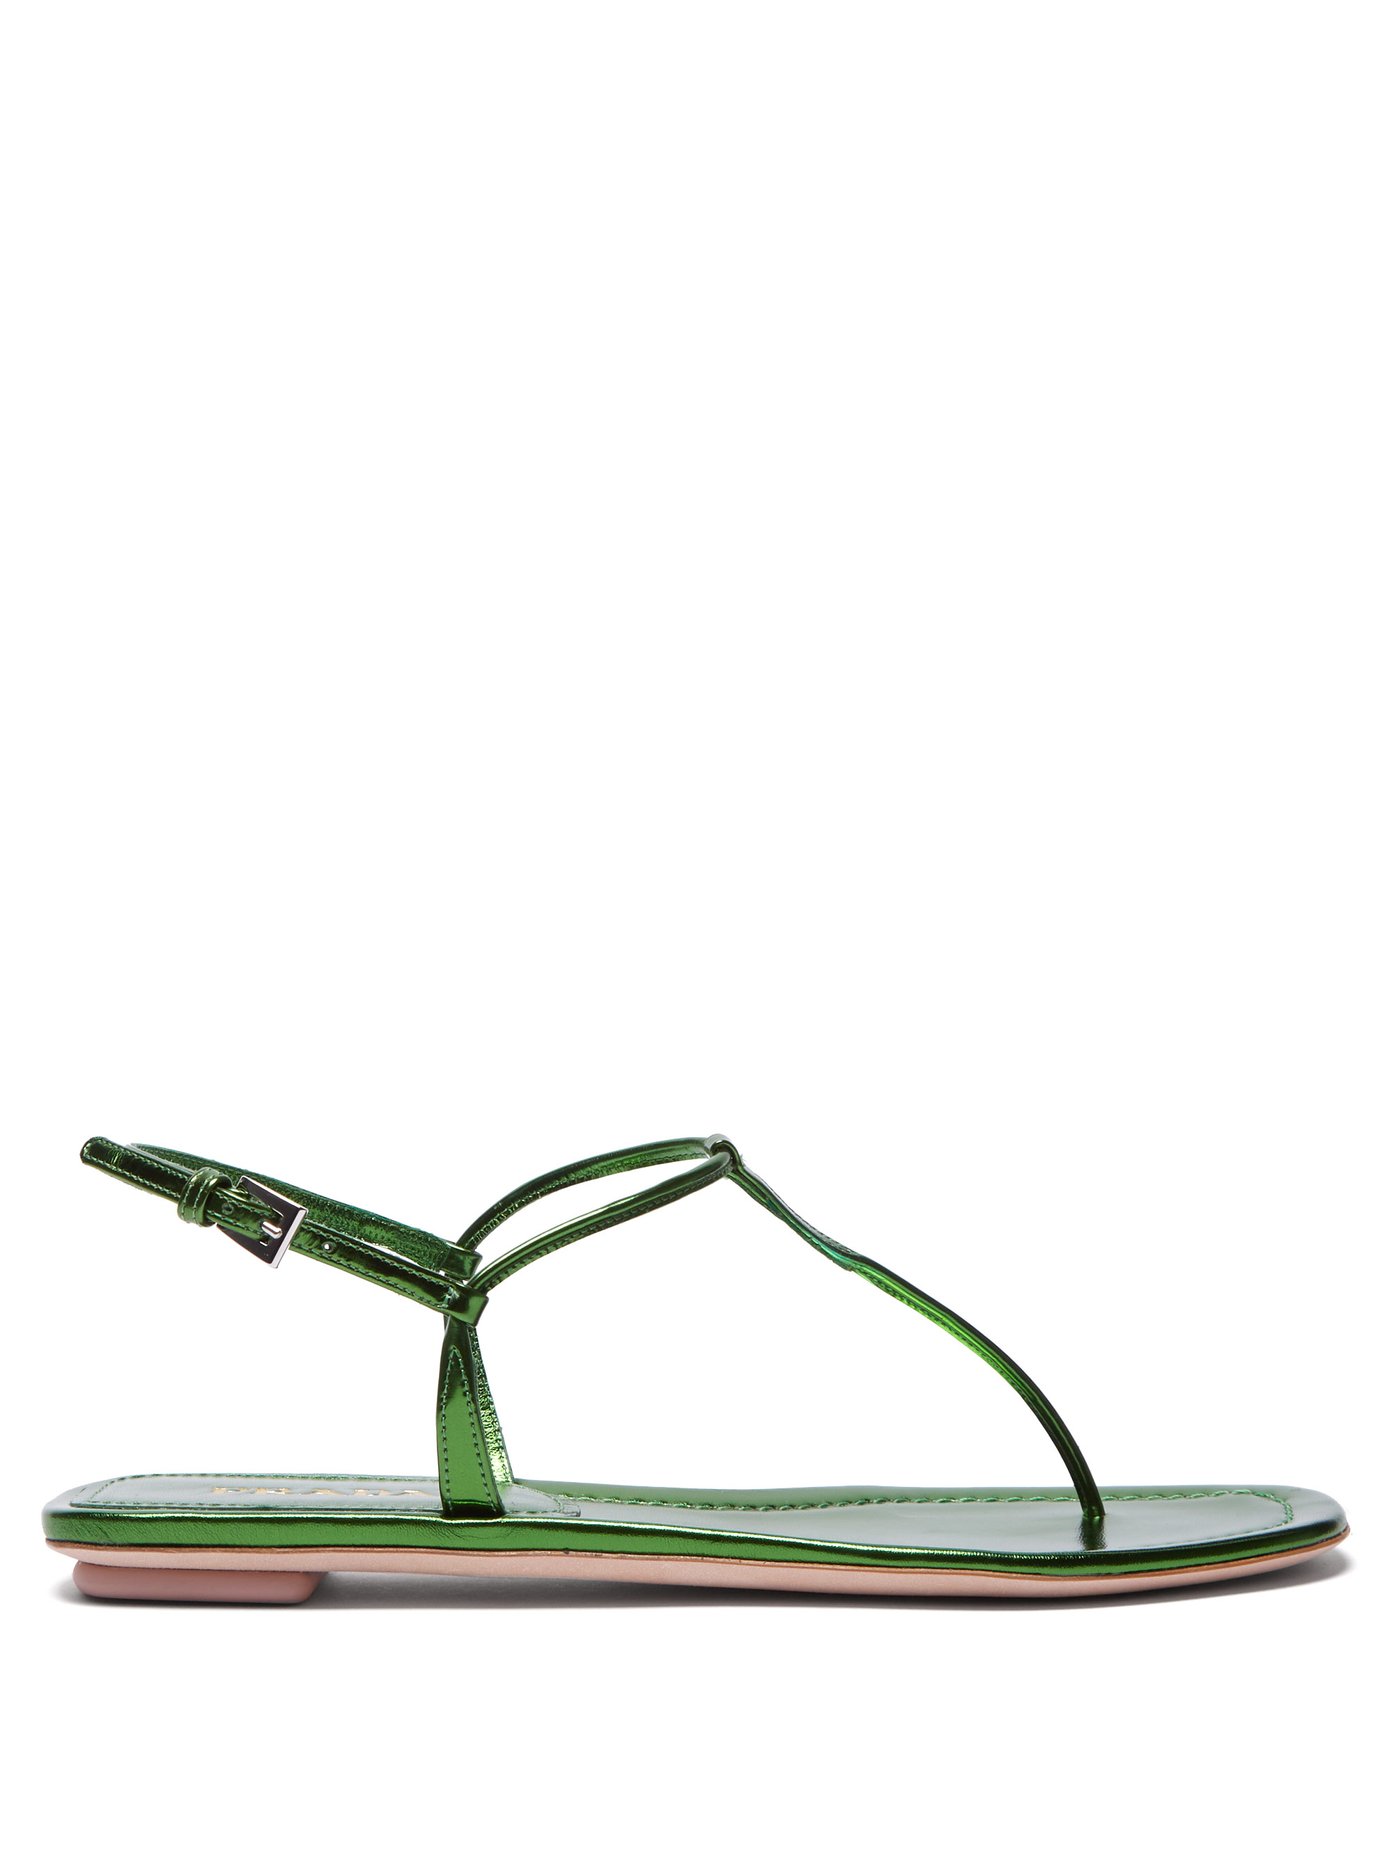 leather t bar sandals